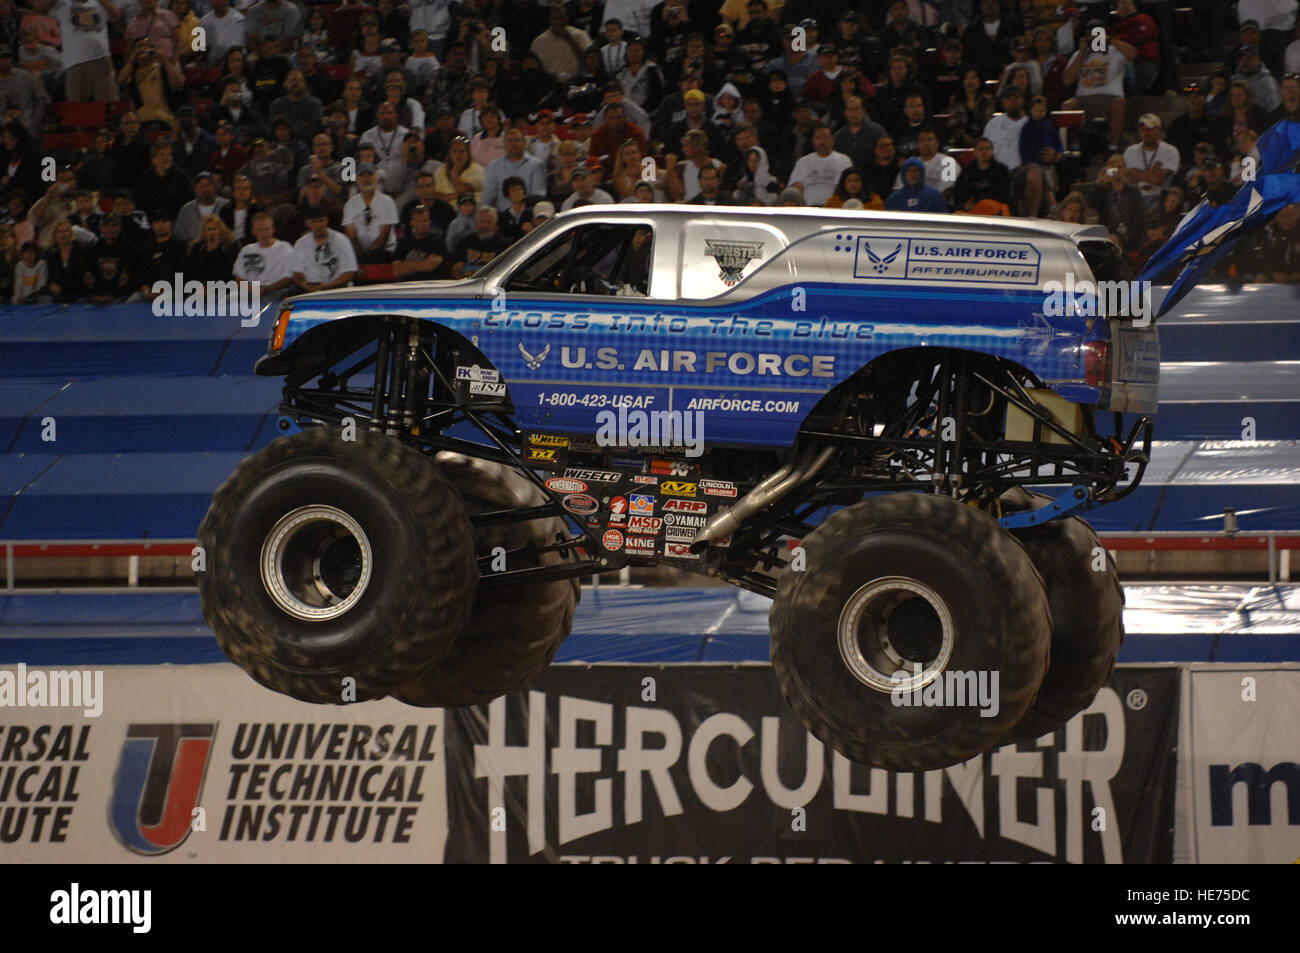 Damon Bradshaw, the driver of the U.S. Air Force 'Afterburner' monster truck, flies through the obstacle course during the Monster Jam World Finals at Sam Boyd Stadium in Las Vegas, Nev., March 29, 2008.  Master Sgt. Kevin J. Gruenwald) (Released) Stock Photo